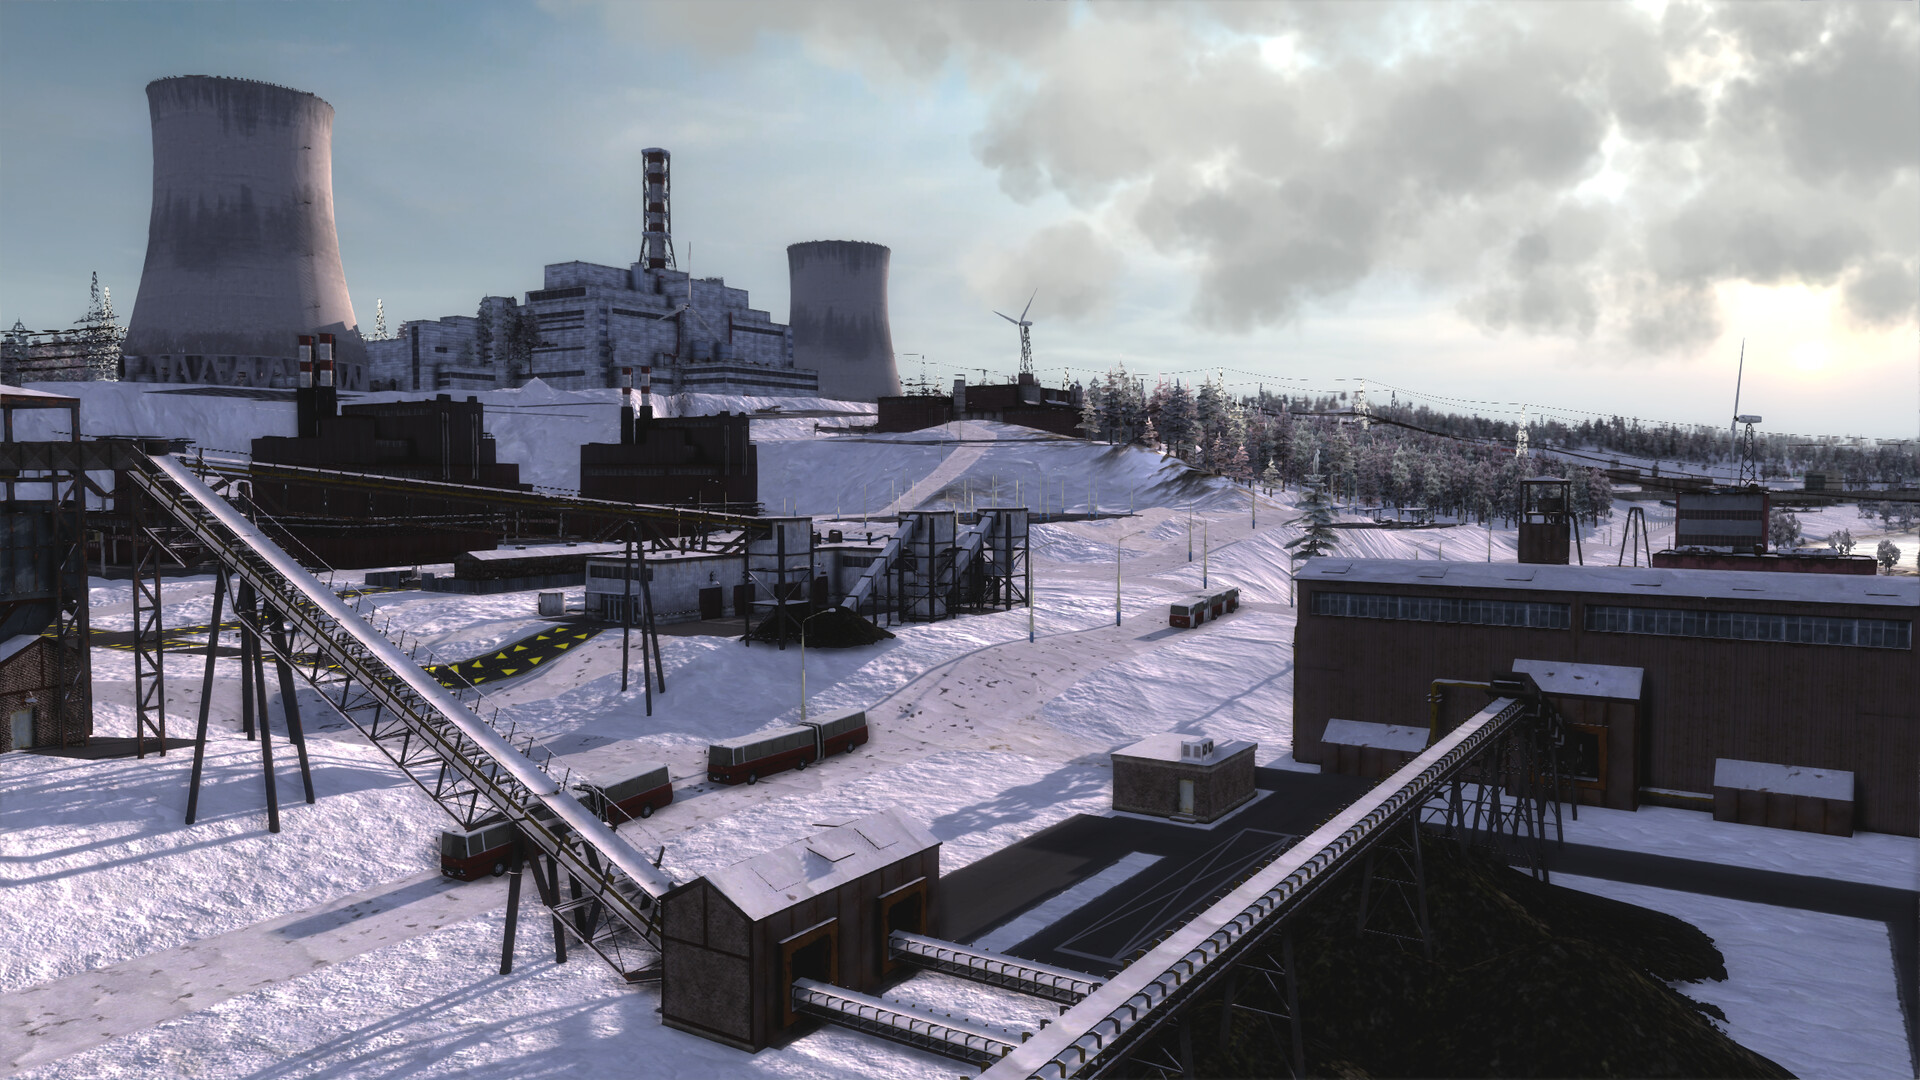  Its five year plan complete, Workers & Resources: Soviet Republic releases its industrial city-building into 1.0 